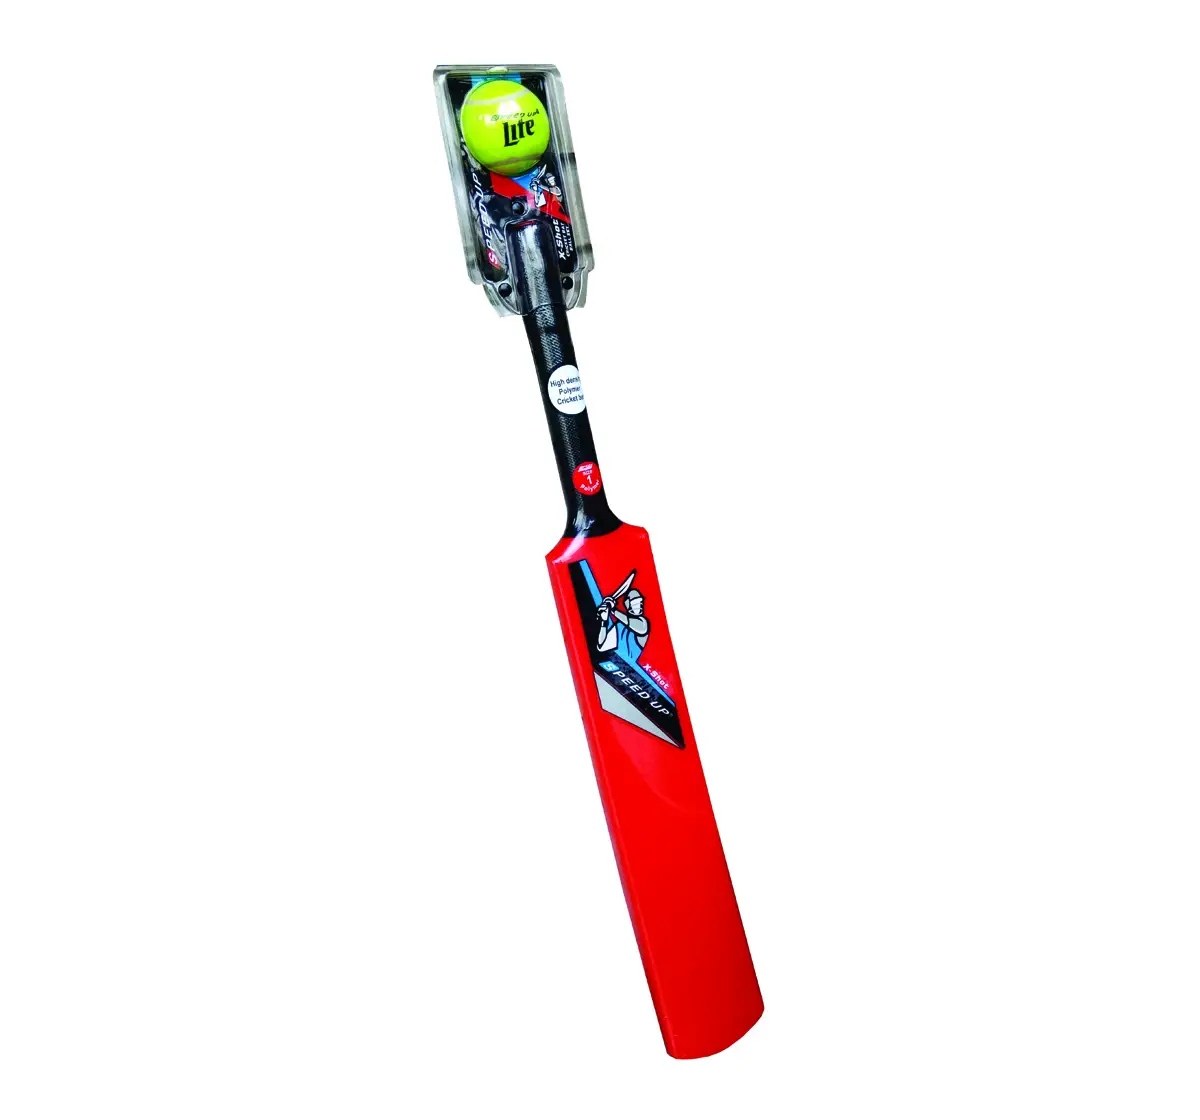 Speed Up Reinforced Polymer Bat And Ball Size 5 Kids Toy Multicolour 8Y+